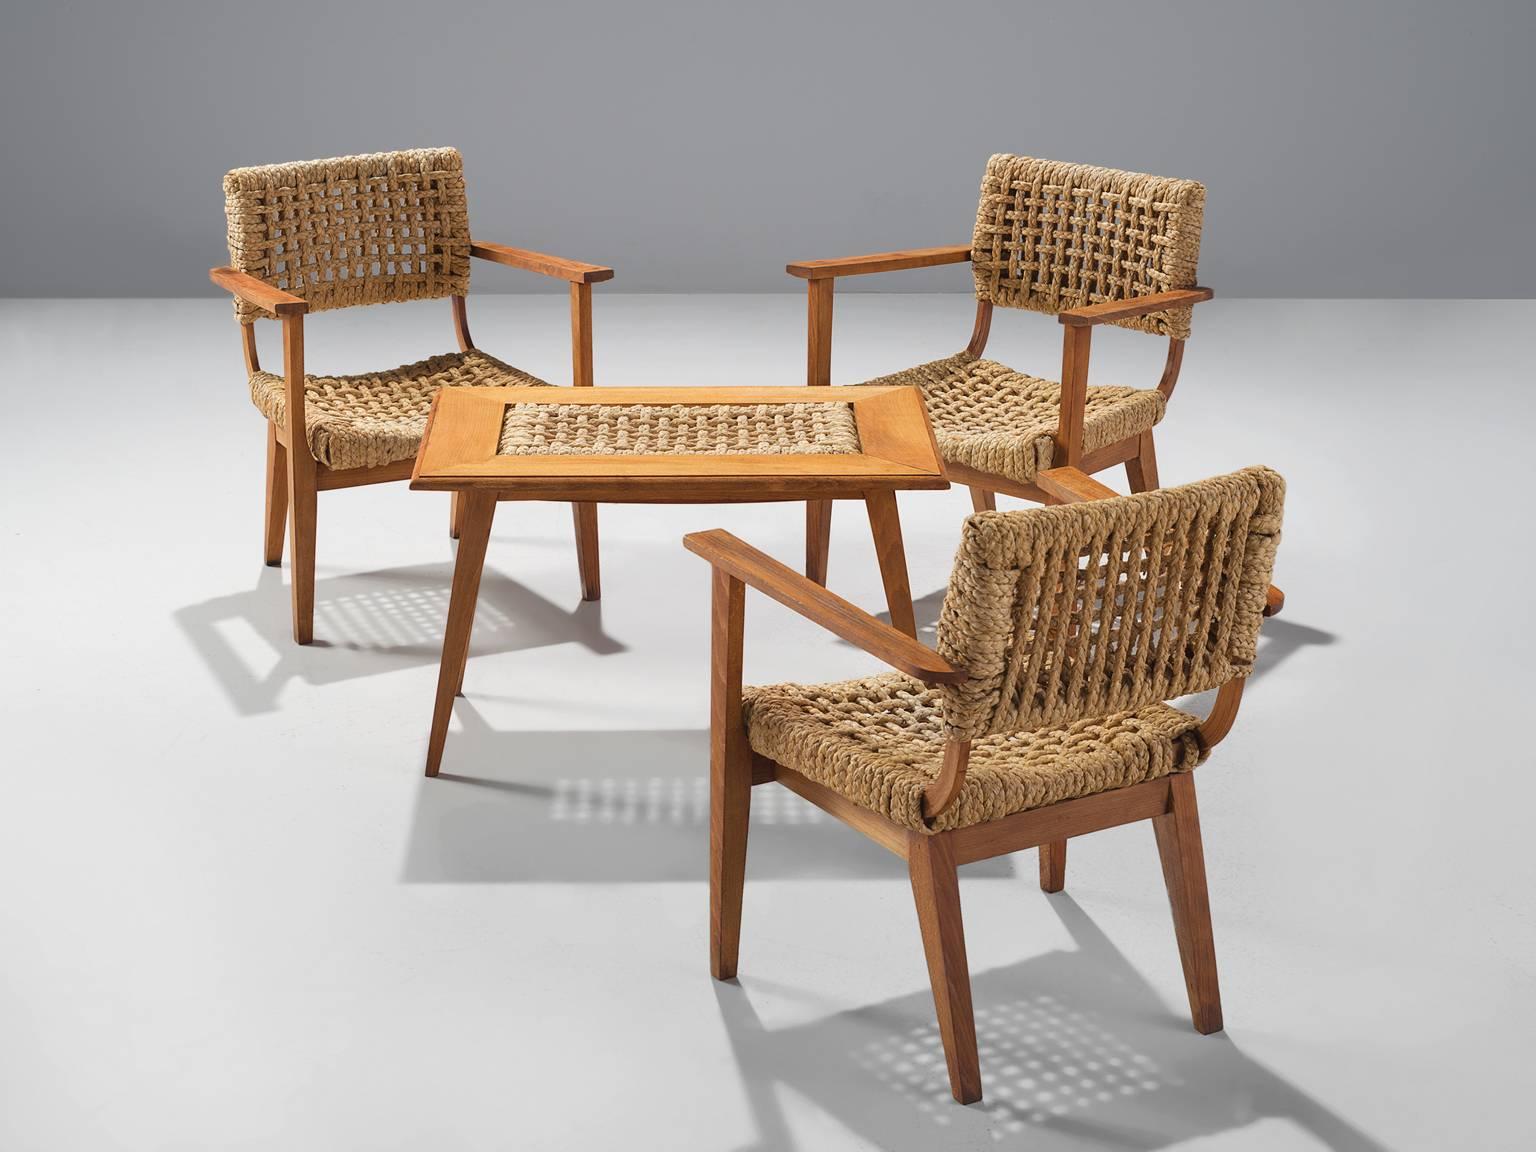 Audoux-Minet for Vibo, set of chairs and table, France, 1940s.

This robust French set originates from the late 1940s. The seat, back and in case of the table the top are made of woven hemp from the abaca plant which is close to the species of the